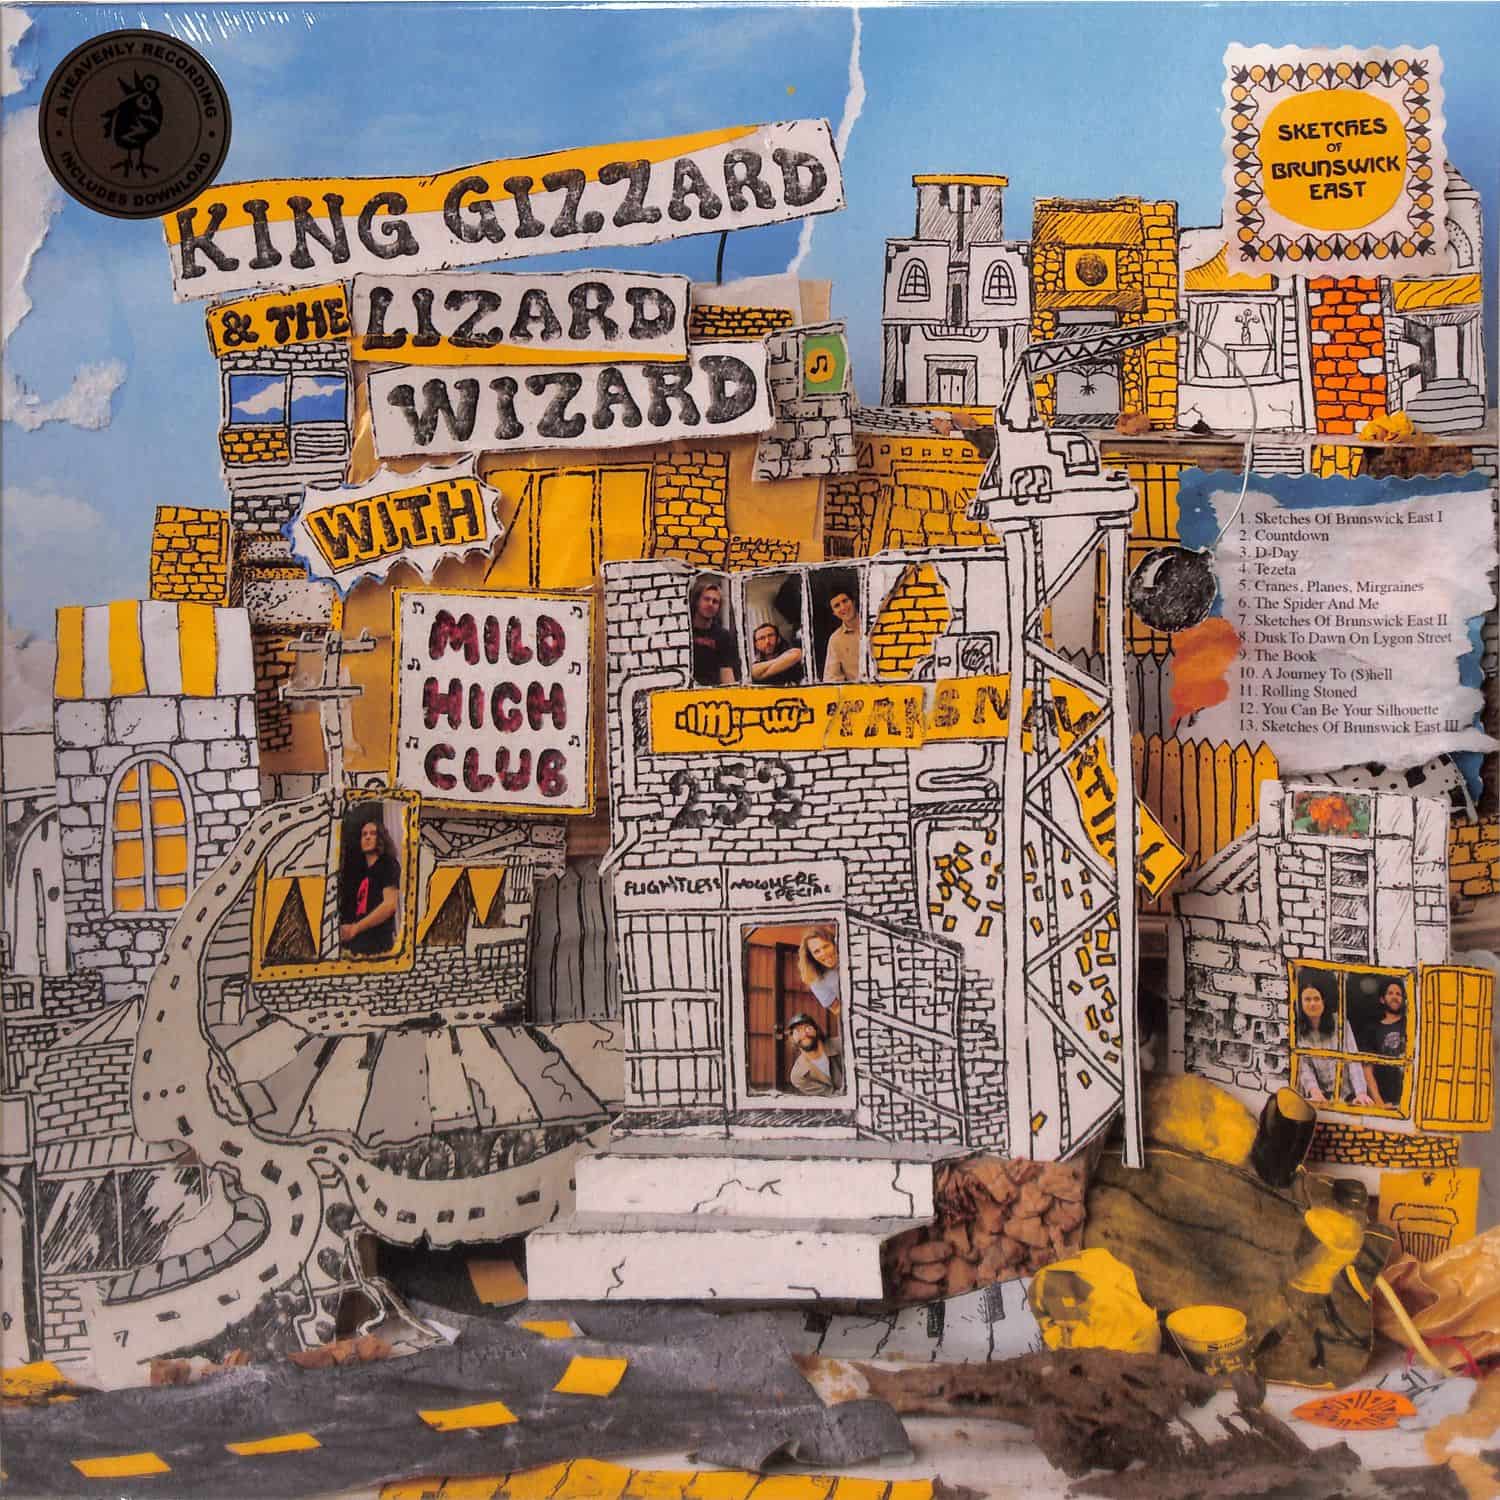 King Gizzard & The Lizard Wizard - SKETCHES OF BRUNSWICK EAST 